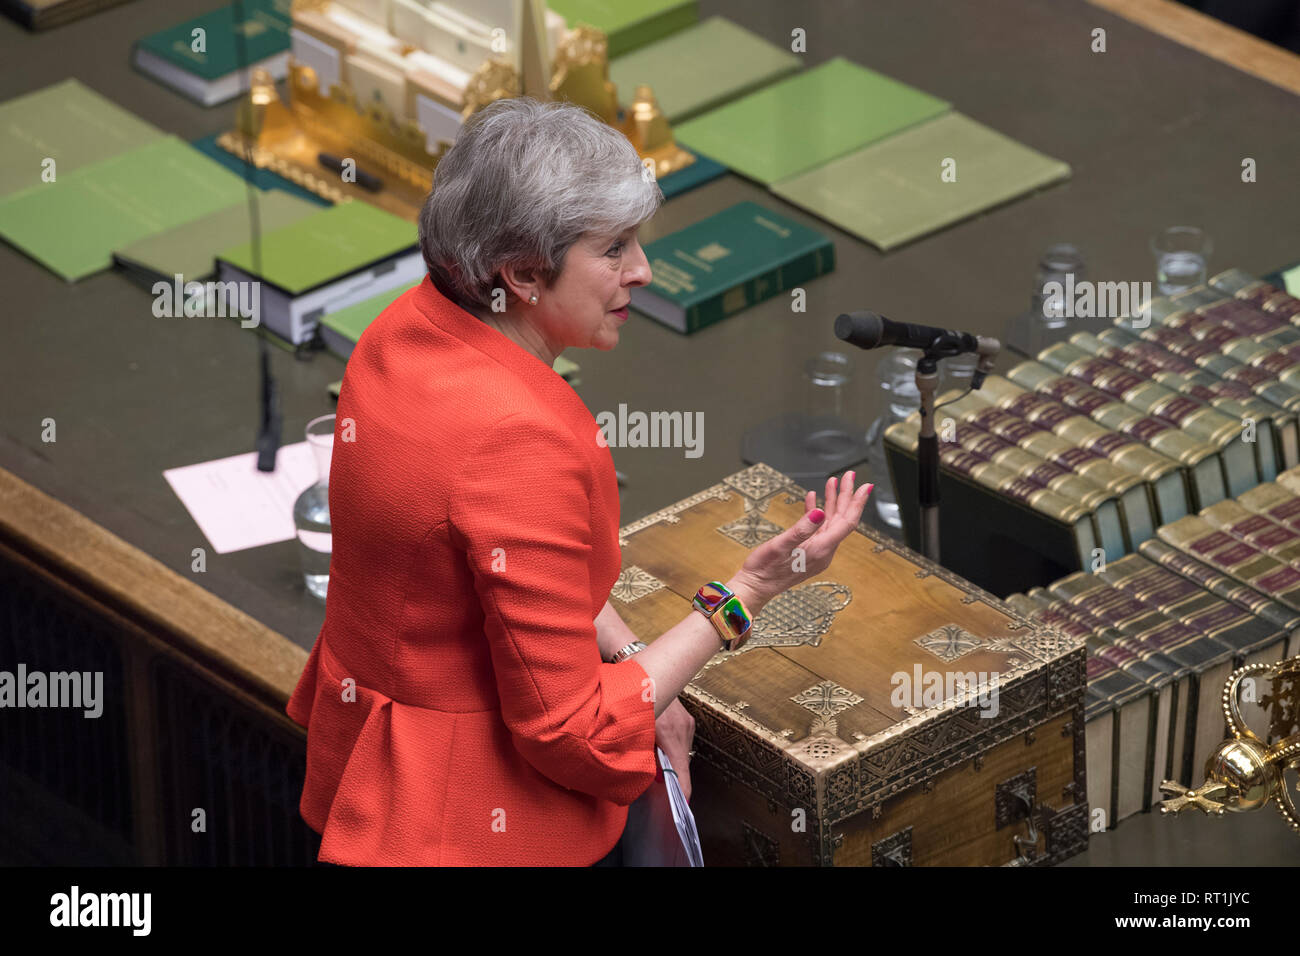 London, Britain. 27th Feb, 2019. British Prime Minister Theresa May attends the Prime Minister's Questions in the House of Commons in London, Britain, on Feb. 27, 2019. Theresa May promised on Tuesday that the members of parliament (MPs) would be given a choice to vote on no-deal Brexit or delayed departure from the European Union (EU) if her deal is rejected in a meaningful vote in mid-March. Credit: British Parliament/Mark Duffy/Xinhua/Alamy Live News Stock Photo